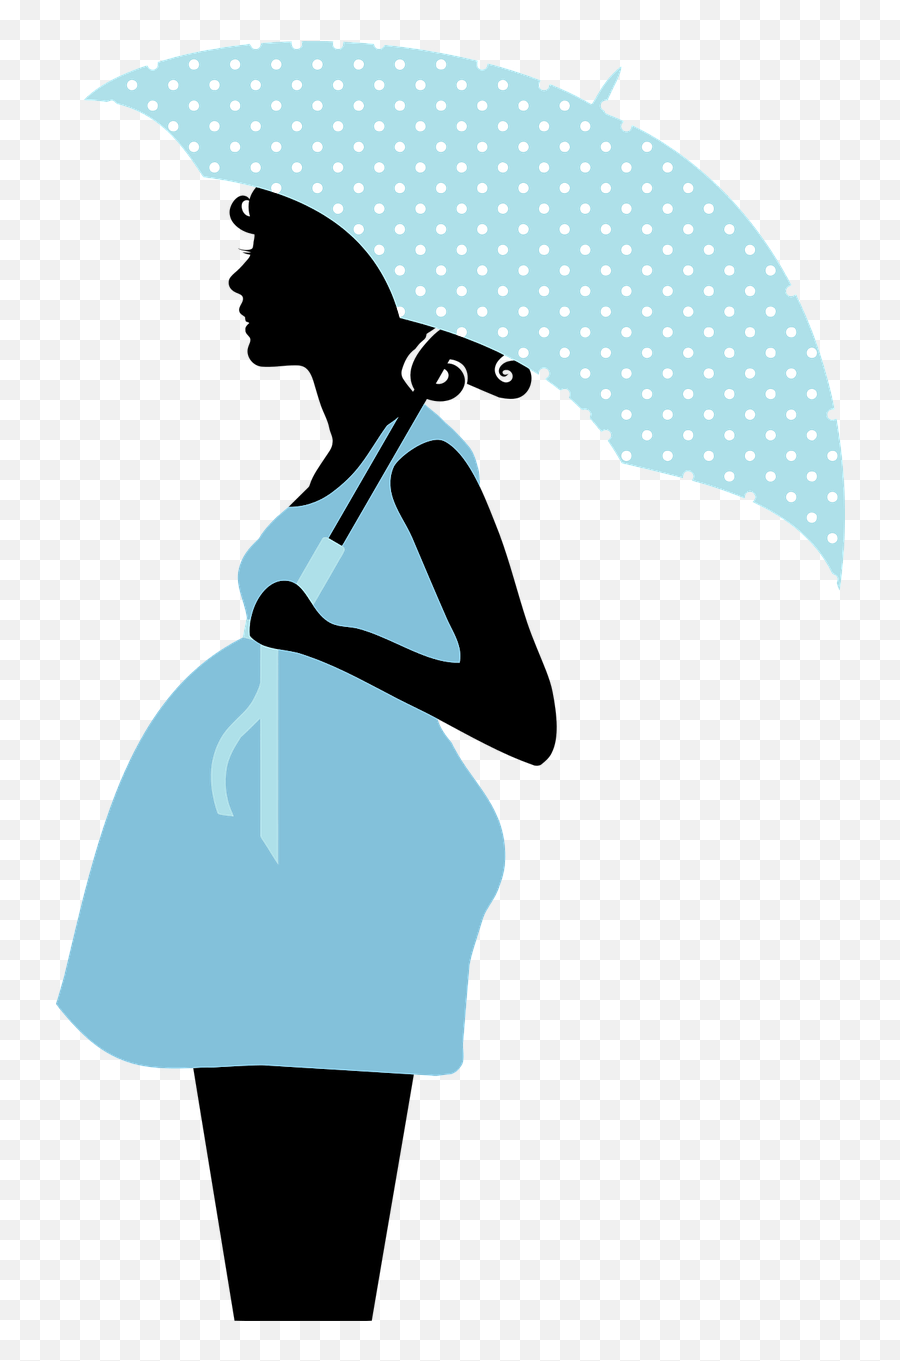 Baby Silhouette Png - Babycomic Umbrella Cartoon Baby Shower Pregnant Woman  Silhouette Clip Art,Baby Silhouette Png - free transparent png images -  